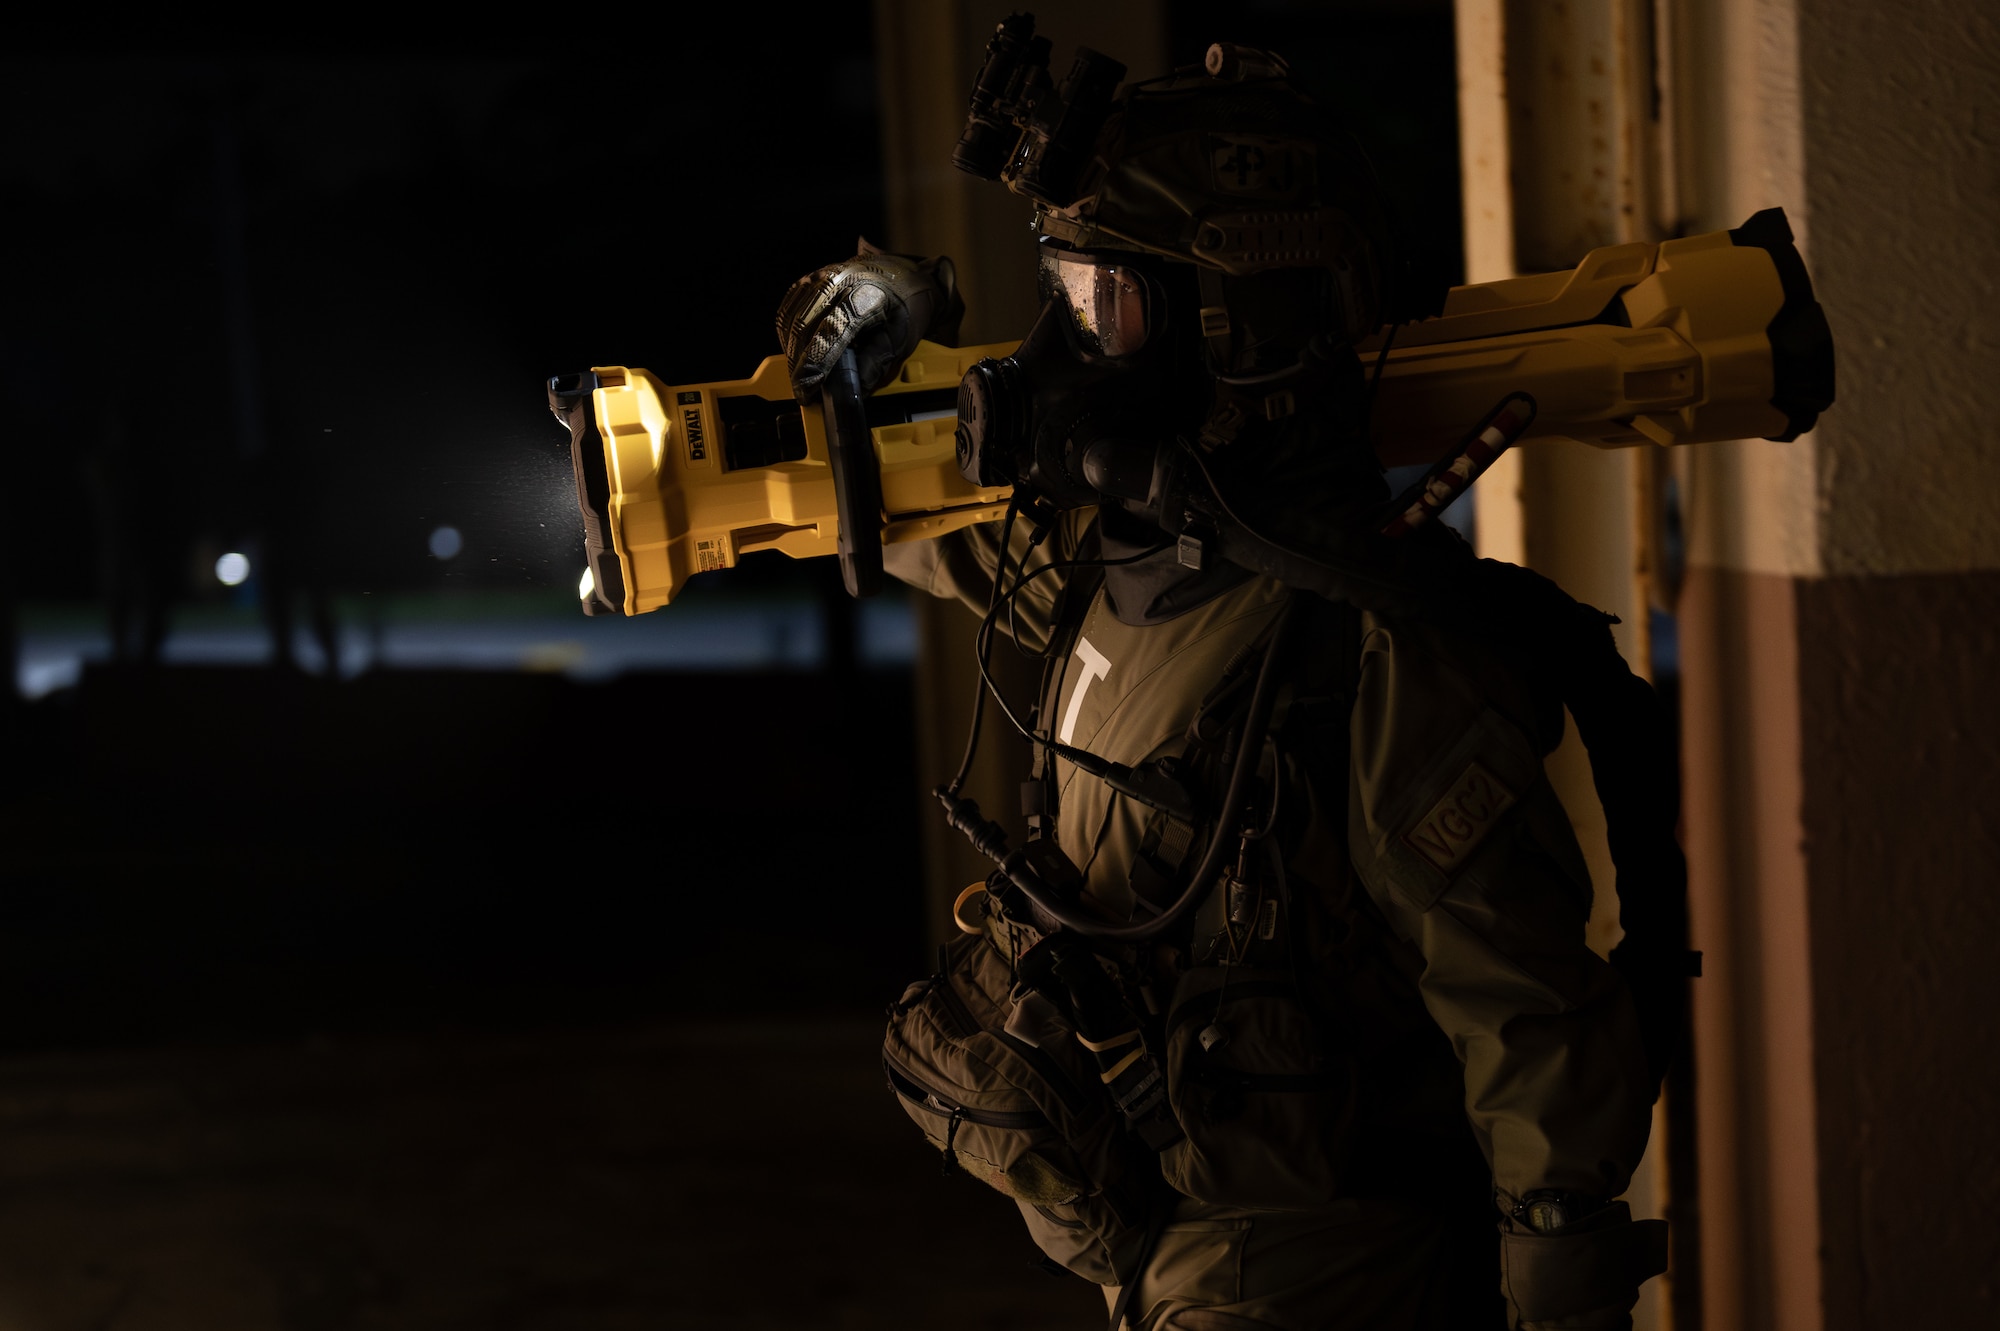 A U.S. Air Force Airman with the 353rd Special Operations Wing prepares to enter an accident scene during a simulated chemical, biological, radiological, nuclear, and explosives mass casualty drill at Kadena Air Base, Japan, Aug. 17, 2023. The functional exercise was conducted to bolster operational capability through a CBRNE mission to test the medical response and quick decision-making capabilities of the operators during a realistic simulated emergency with multiple casualties. (U.S. Air Force photo by Staff Sgt. Jessi Roth)